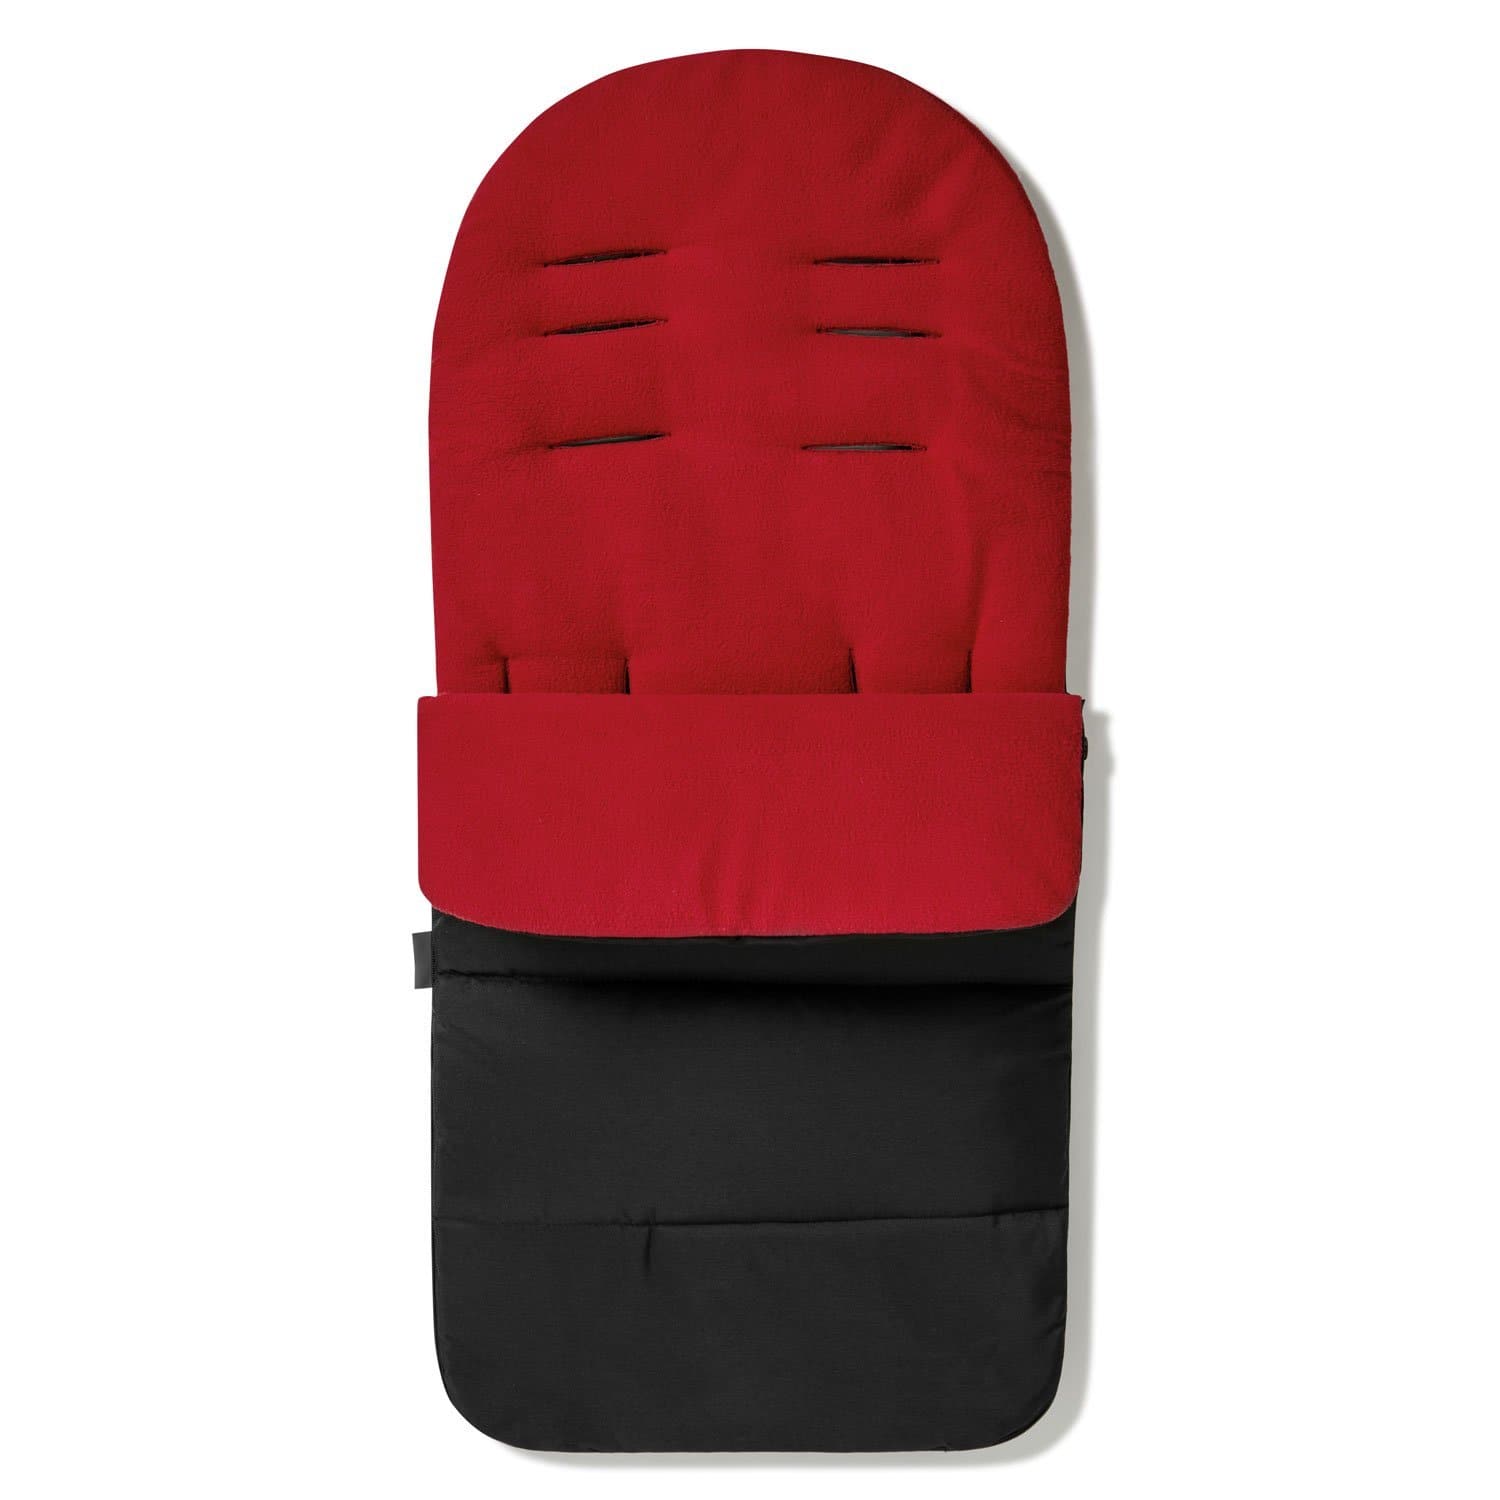 Premium Footmuff / Cosy Toes Compatible with Babylo - For Your Little One